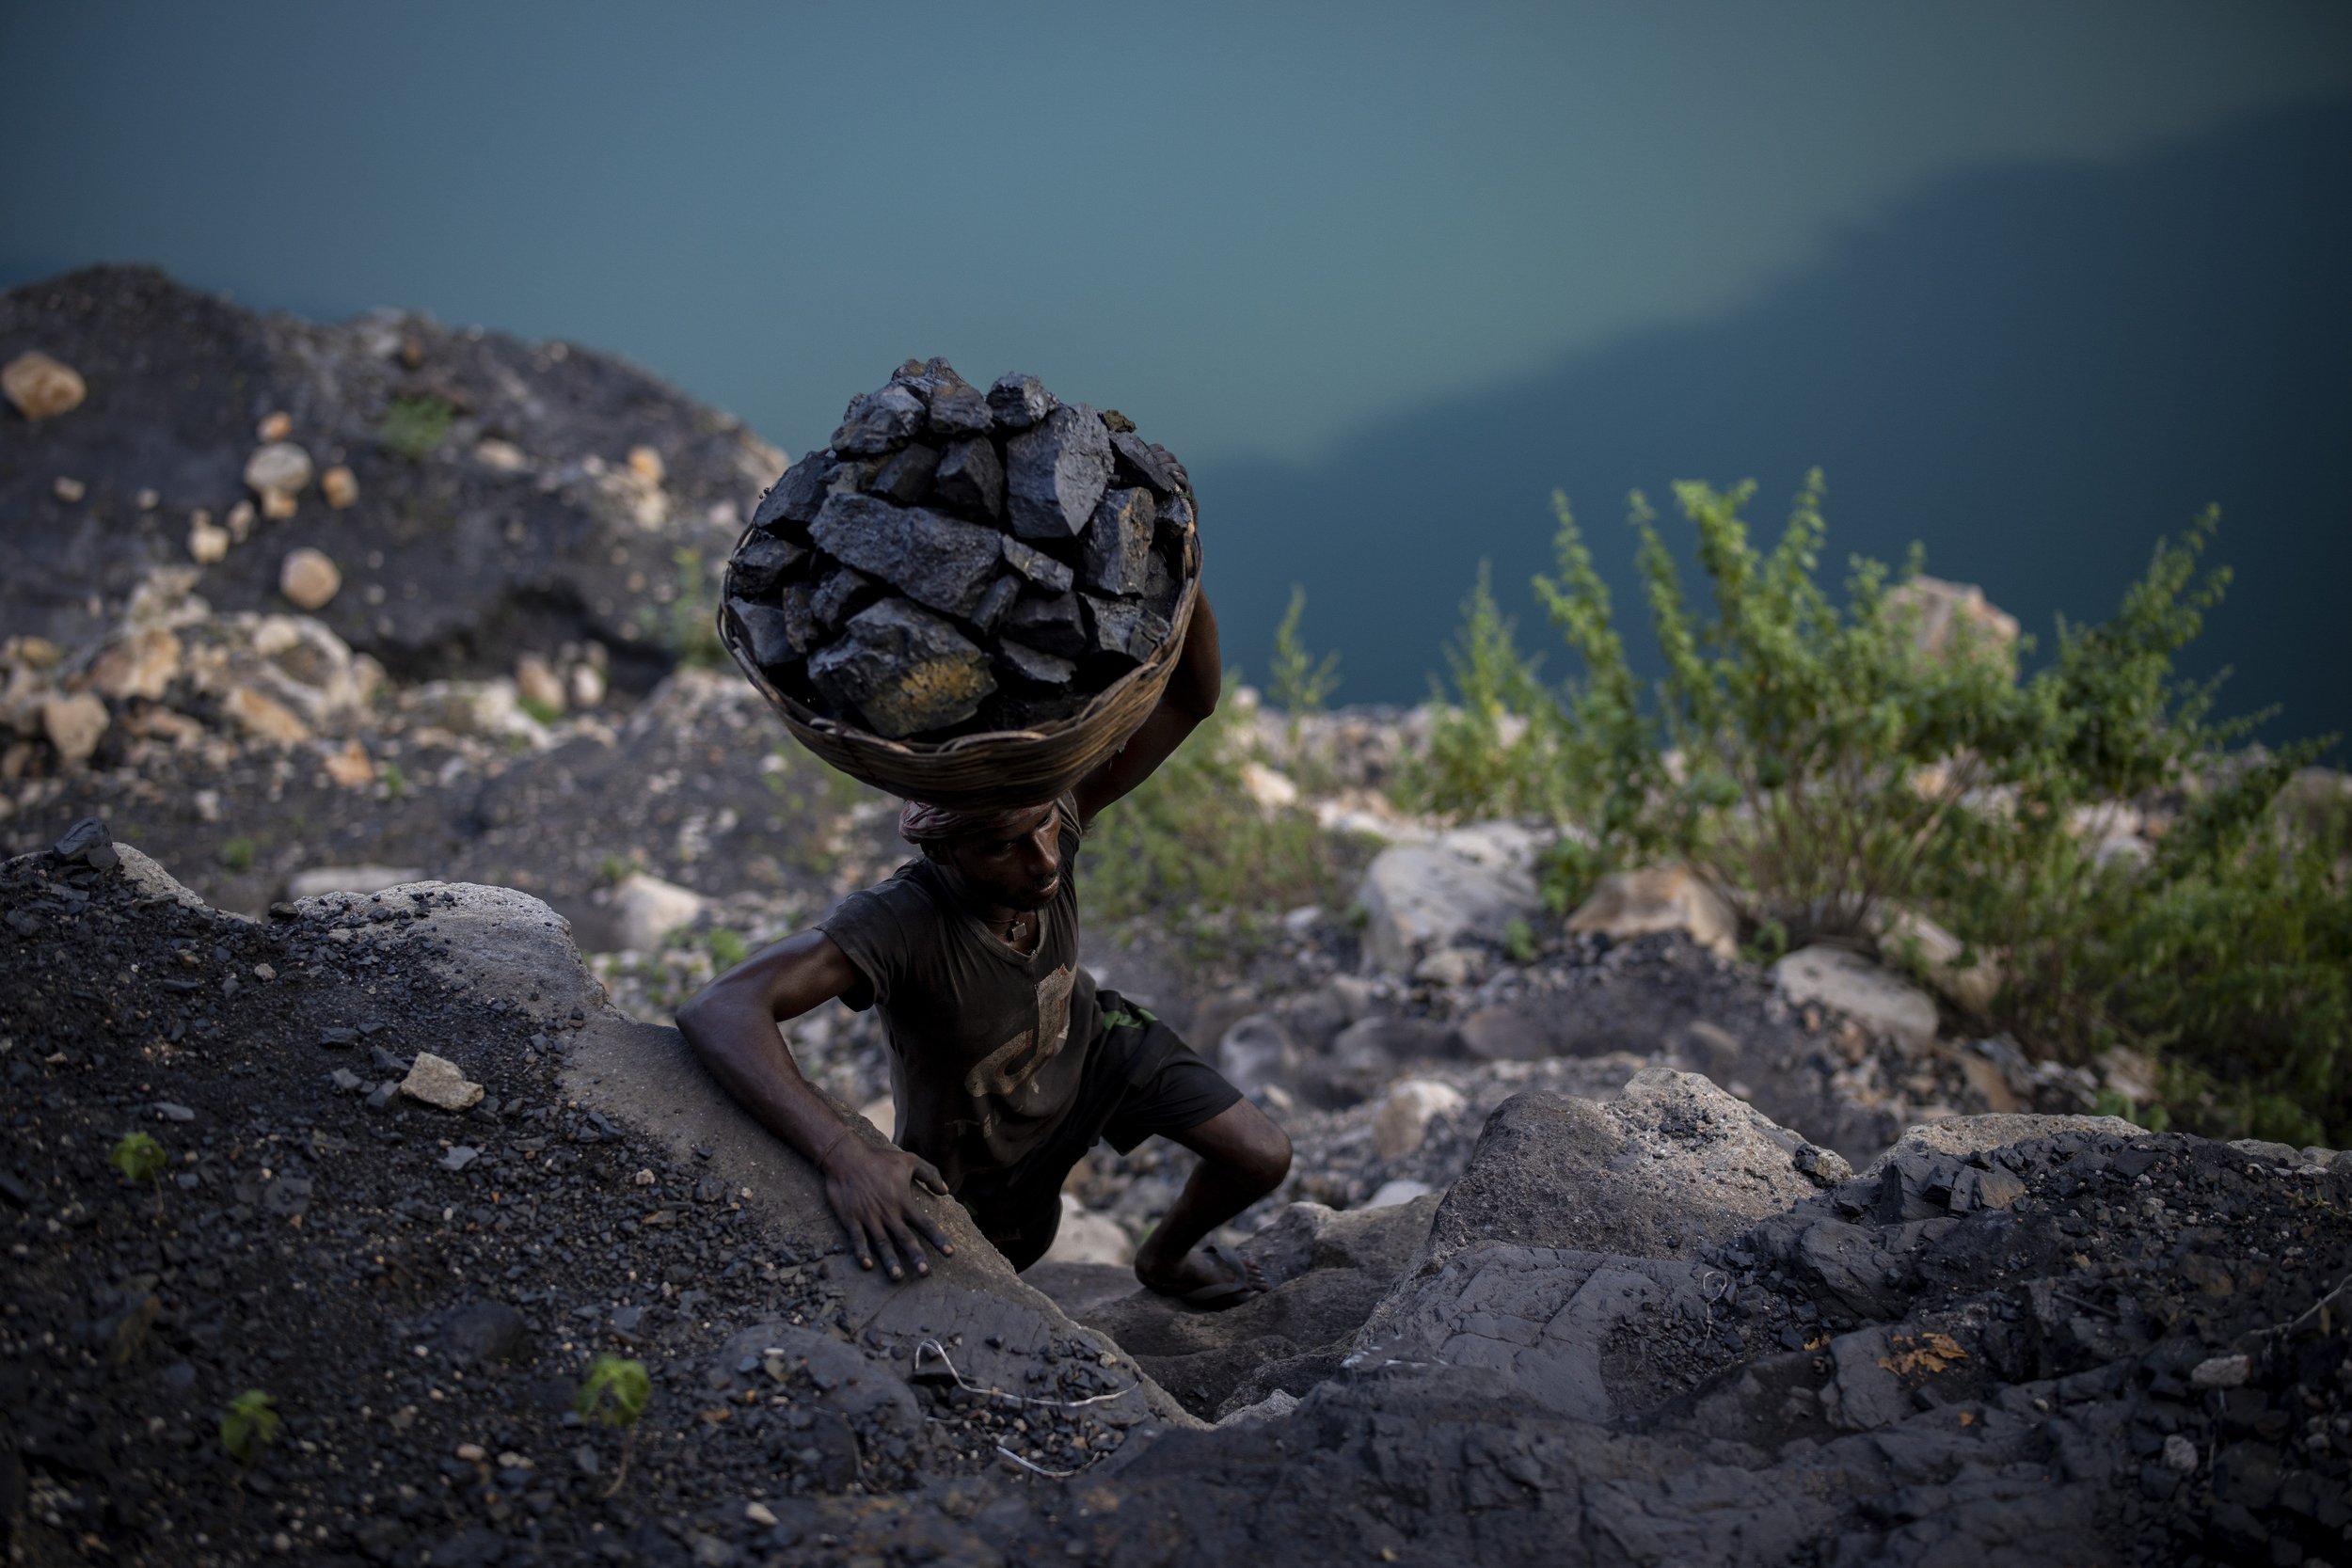  A man climbs a steep ridge with a basket of coal scavenged from a mine near Dhanbad, India, in the eastern state of Jharkhand, on Sept. 24, 2021. A 2021 Indian government study found that Jharkhand state, among the poorest in India and the state wit